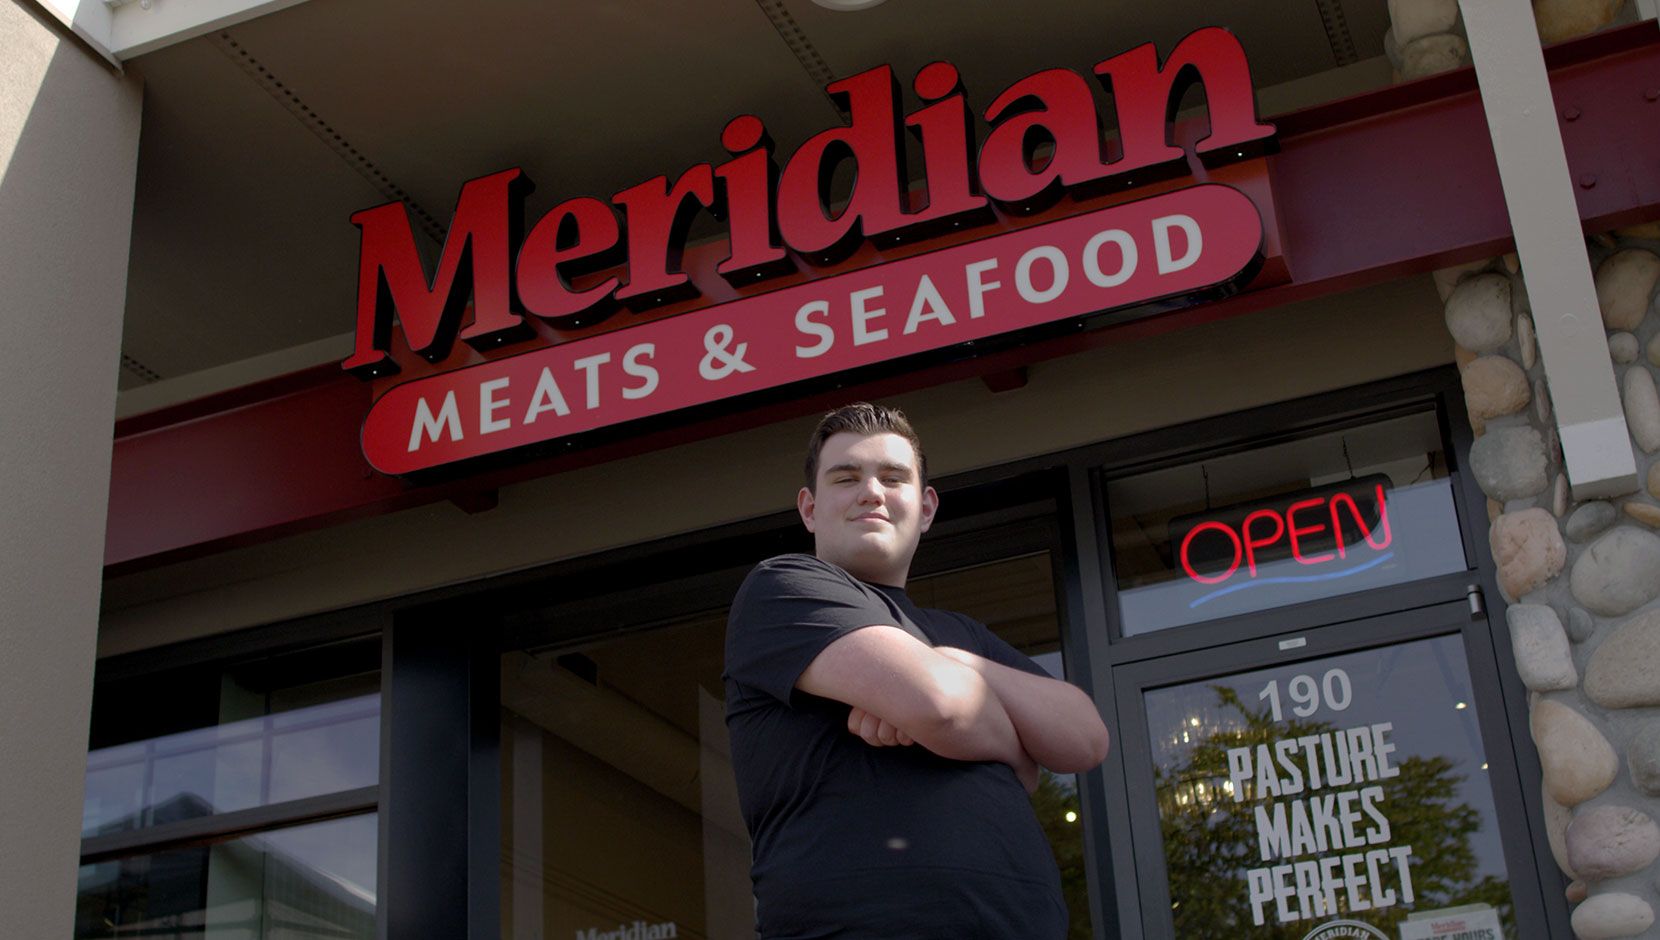 Lucas of Meridian Meats & Seafood outside of their store. He is a white high schooler with his arms crossed on his chest with a small smile.